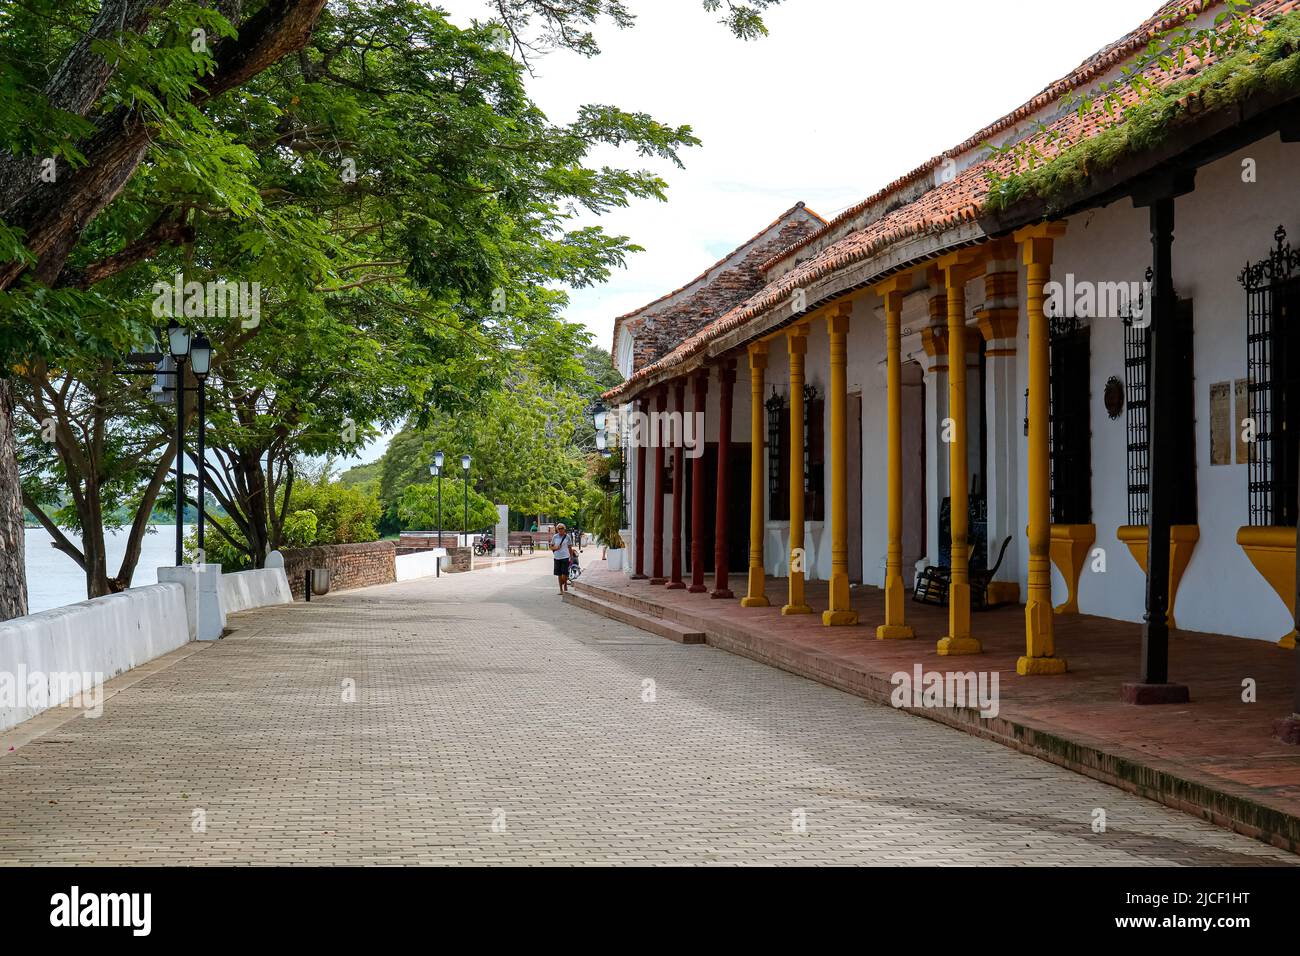 Typical street with historic white buildings, colorful pillars and trees trees of Santa Cruz de Mompox, Colombia, World Heritage Stock Photo